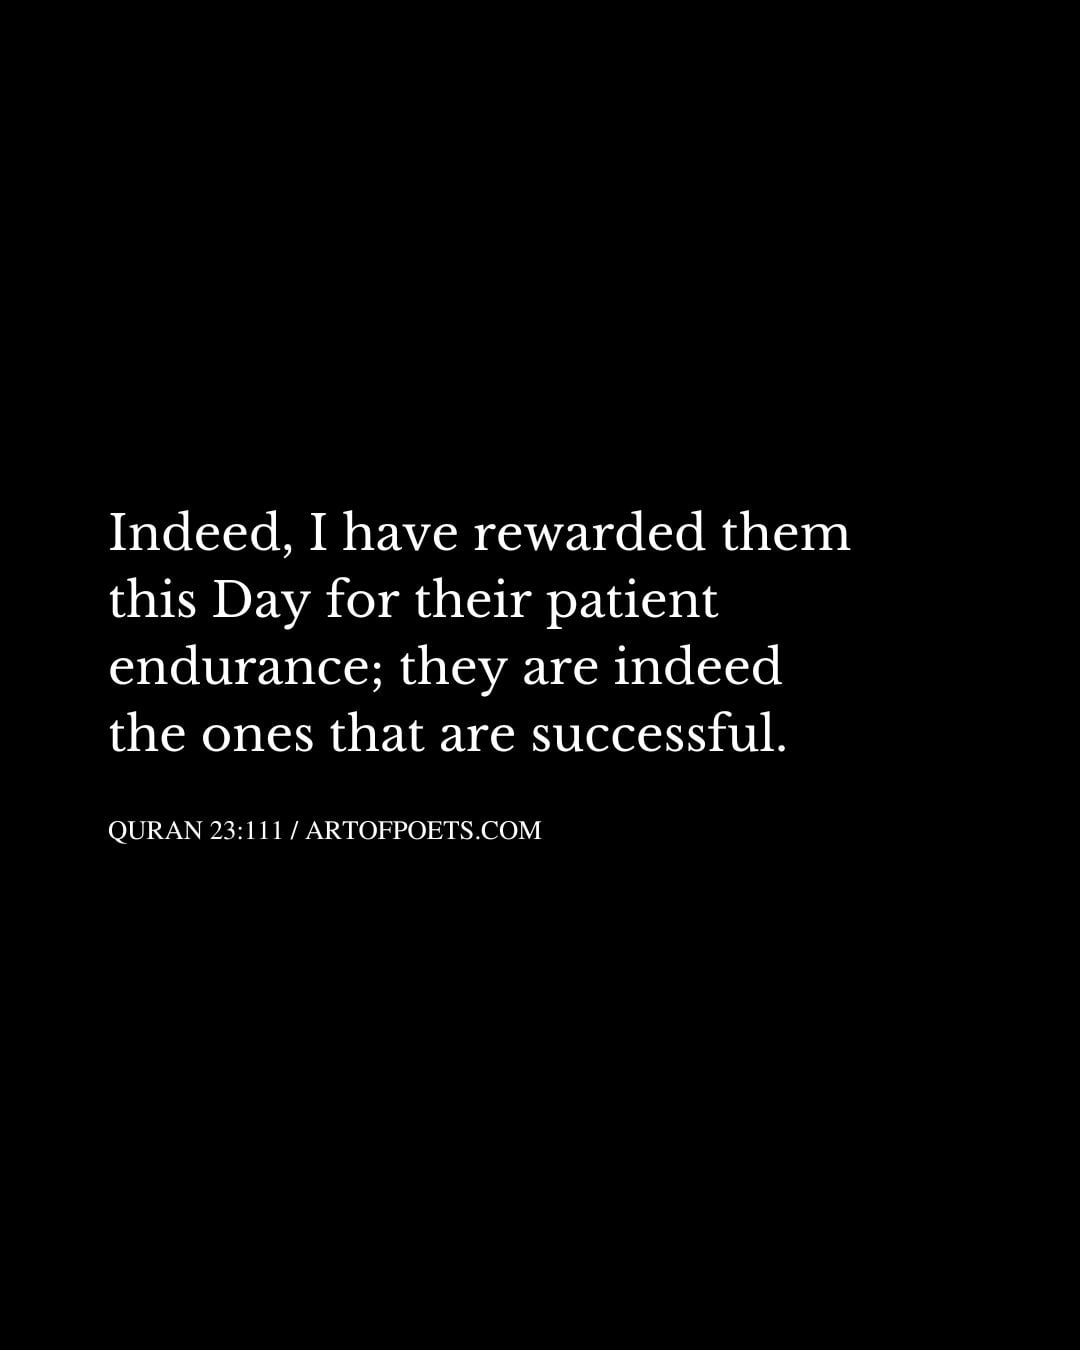 Indeed I have rewarded them this Day for their patient endurance they are indeed the ones that are successful